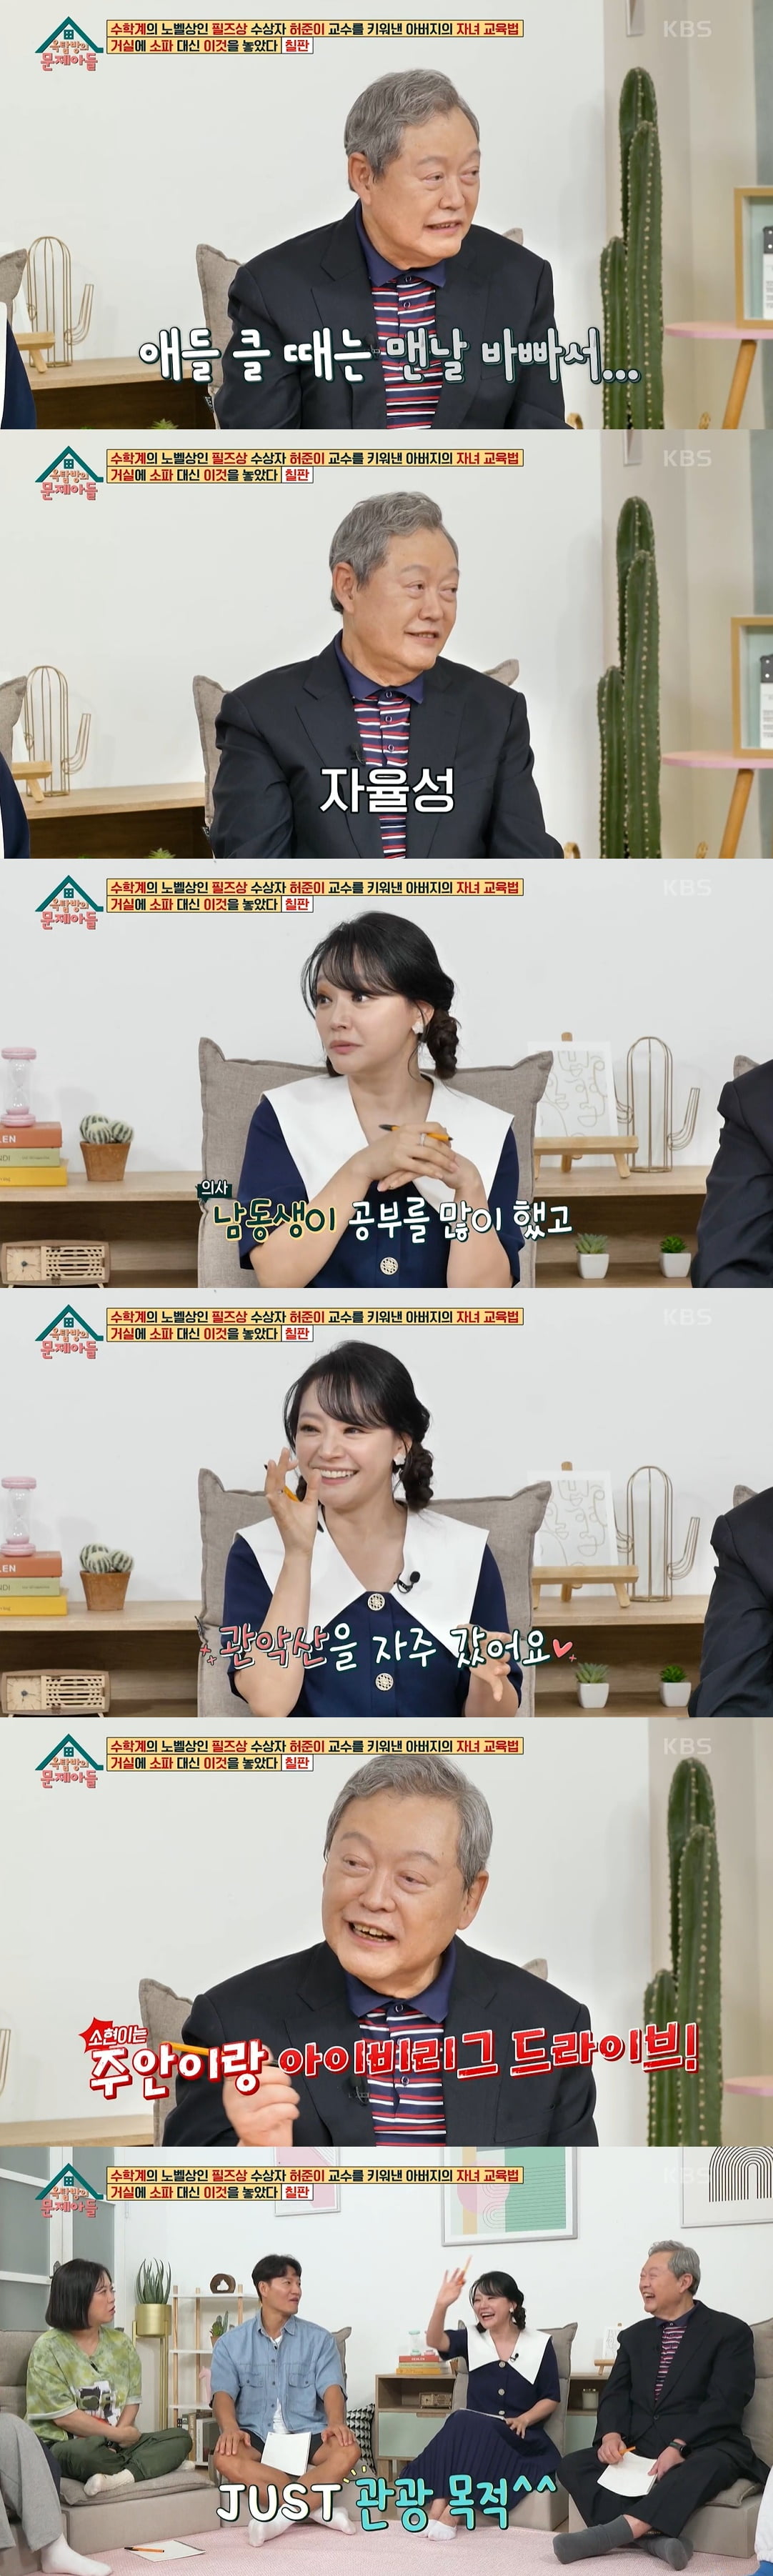 Kim So-hyun "The son of the top 0.01% now has no ability to be gifted"